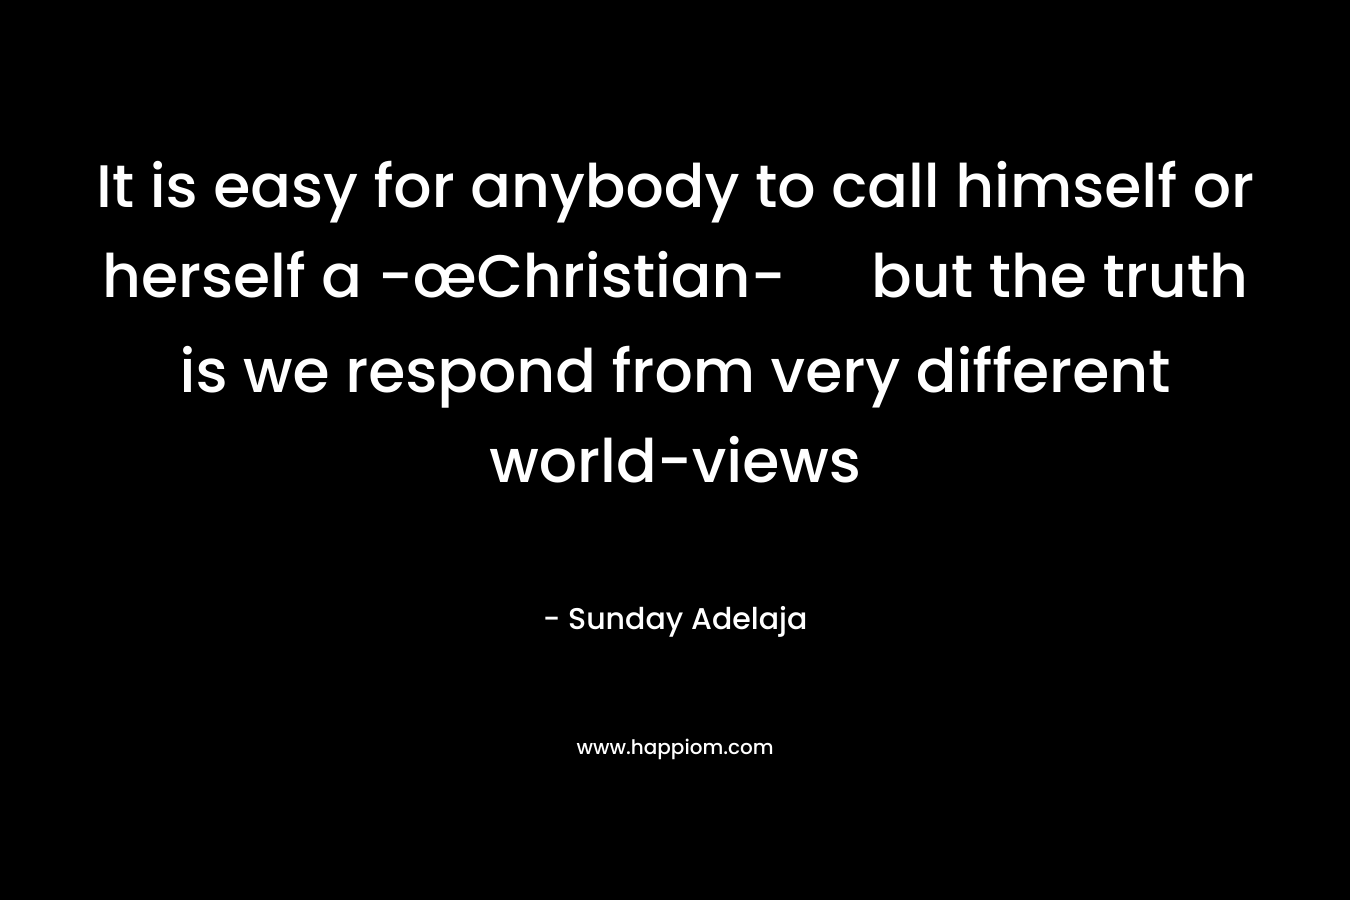 It is easy for anybody to call himself or herself a -œChristian- but the truth is we respond from very different world-views